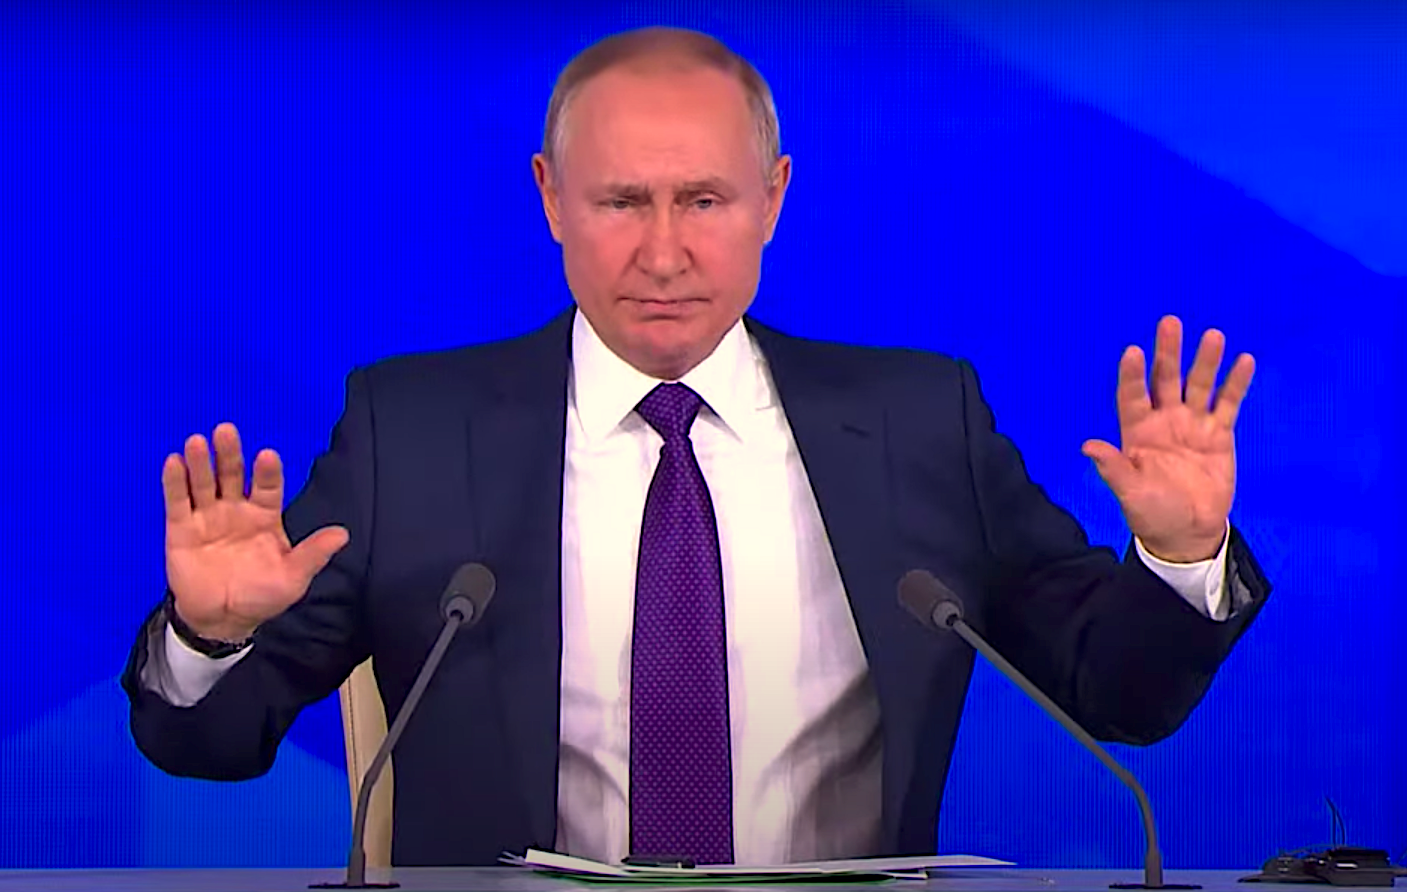 Putin at his press conference in December 2021. Photo: YouTube/RT